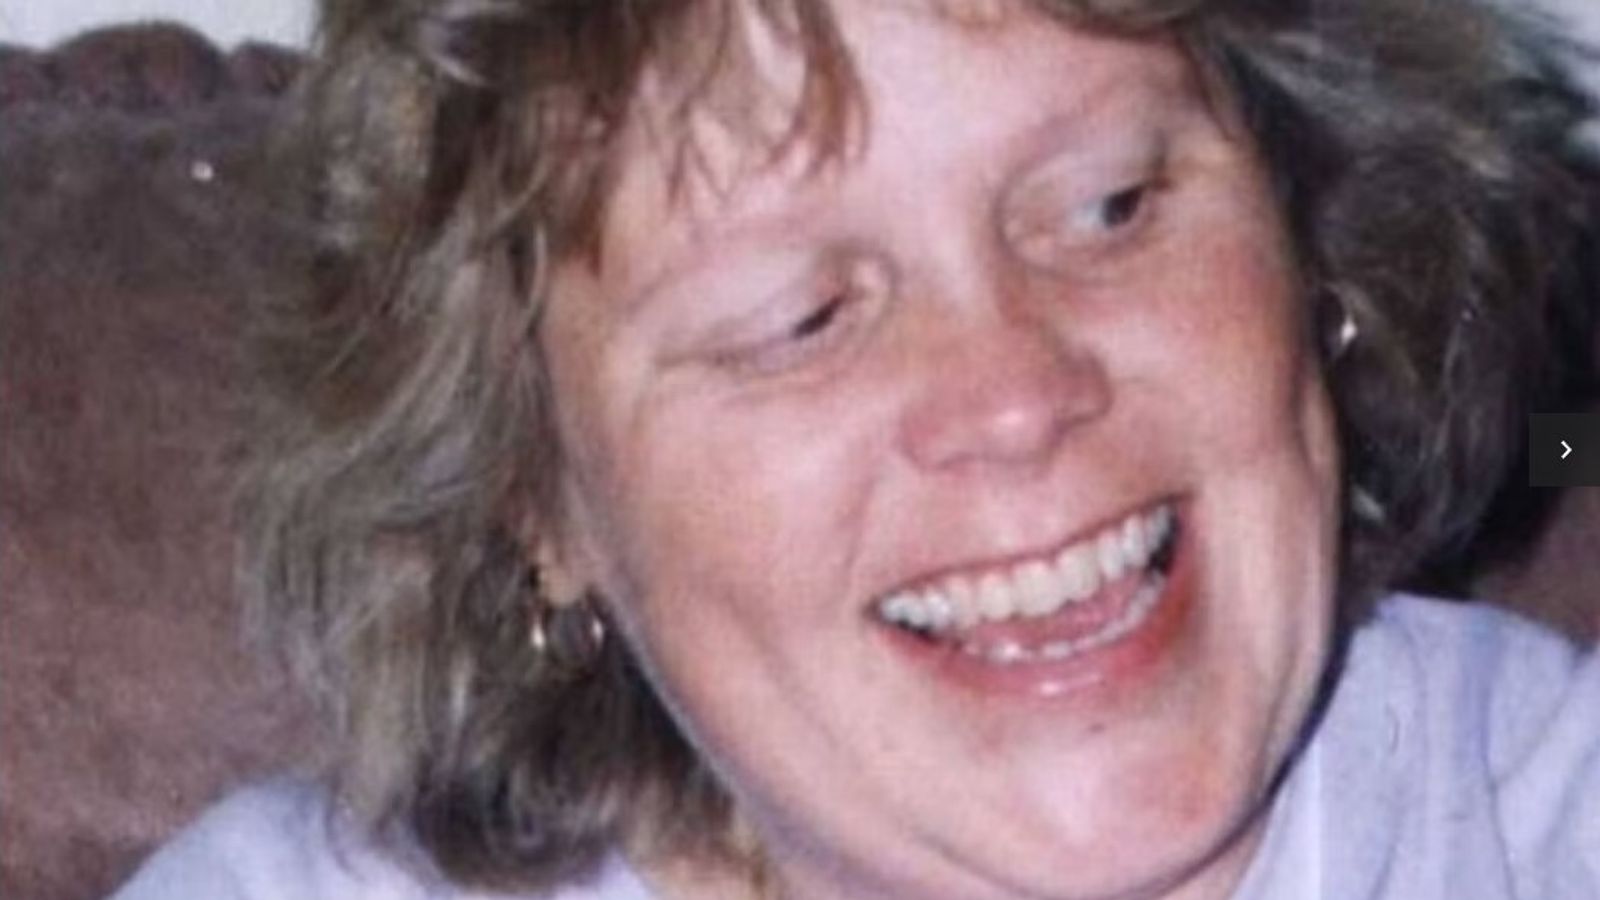 Remains of pregnant woman murdered 20 years ago found buried in garden